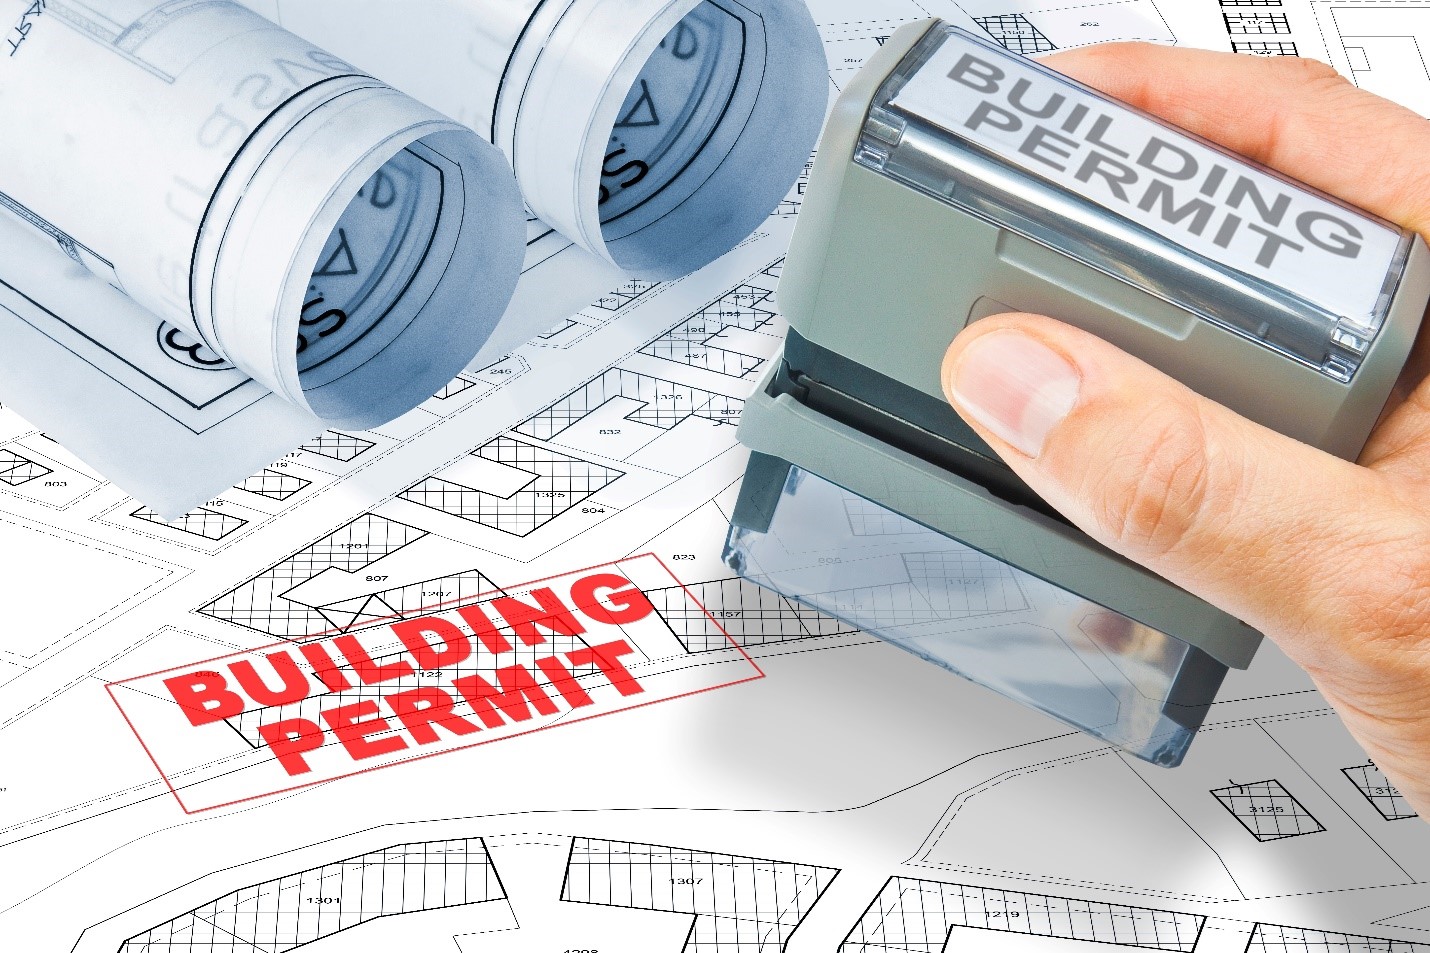 Toronto Building Division: Audit of Intake and Plan Review of Applications for Building Permits Featured Image